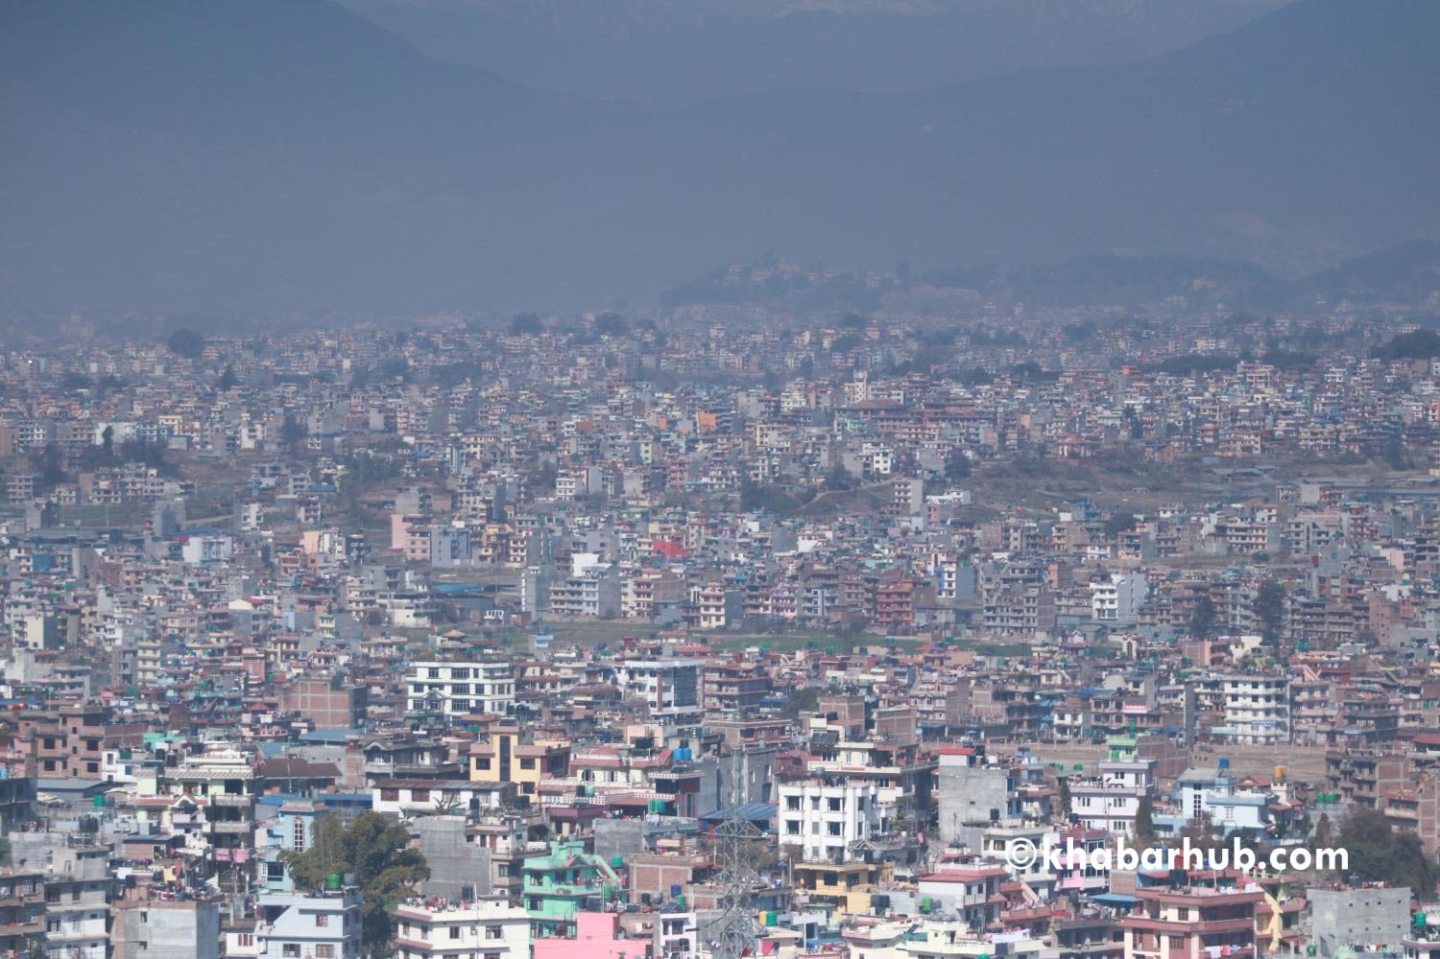 Kathmandu ranks seventh among the world’s most polluted cities